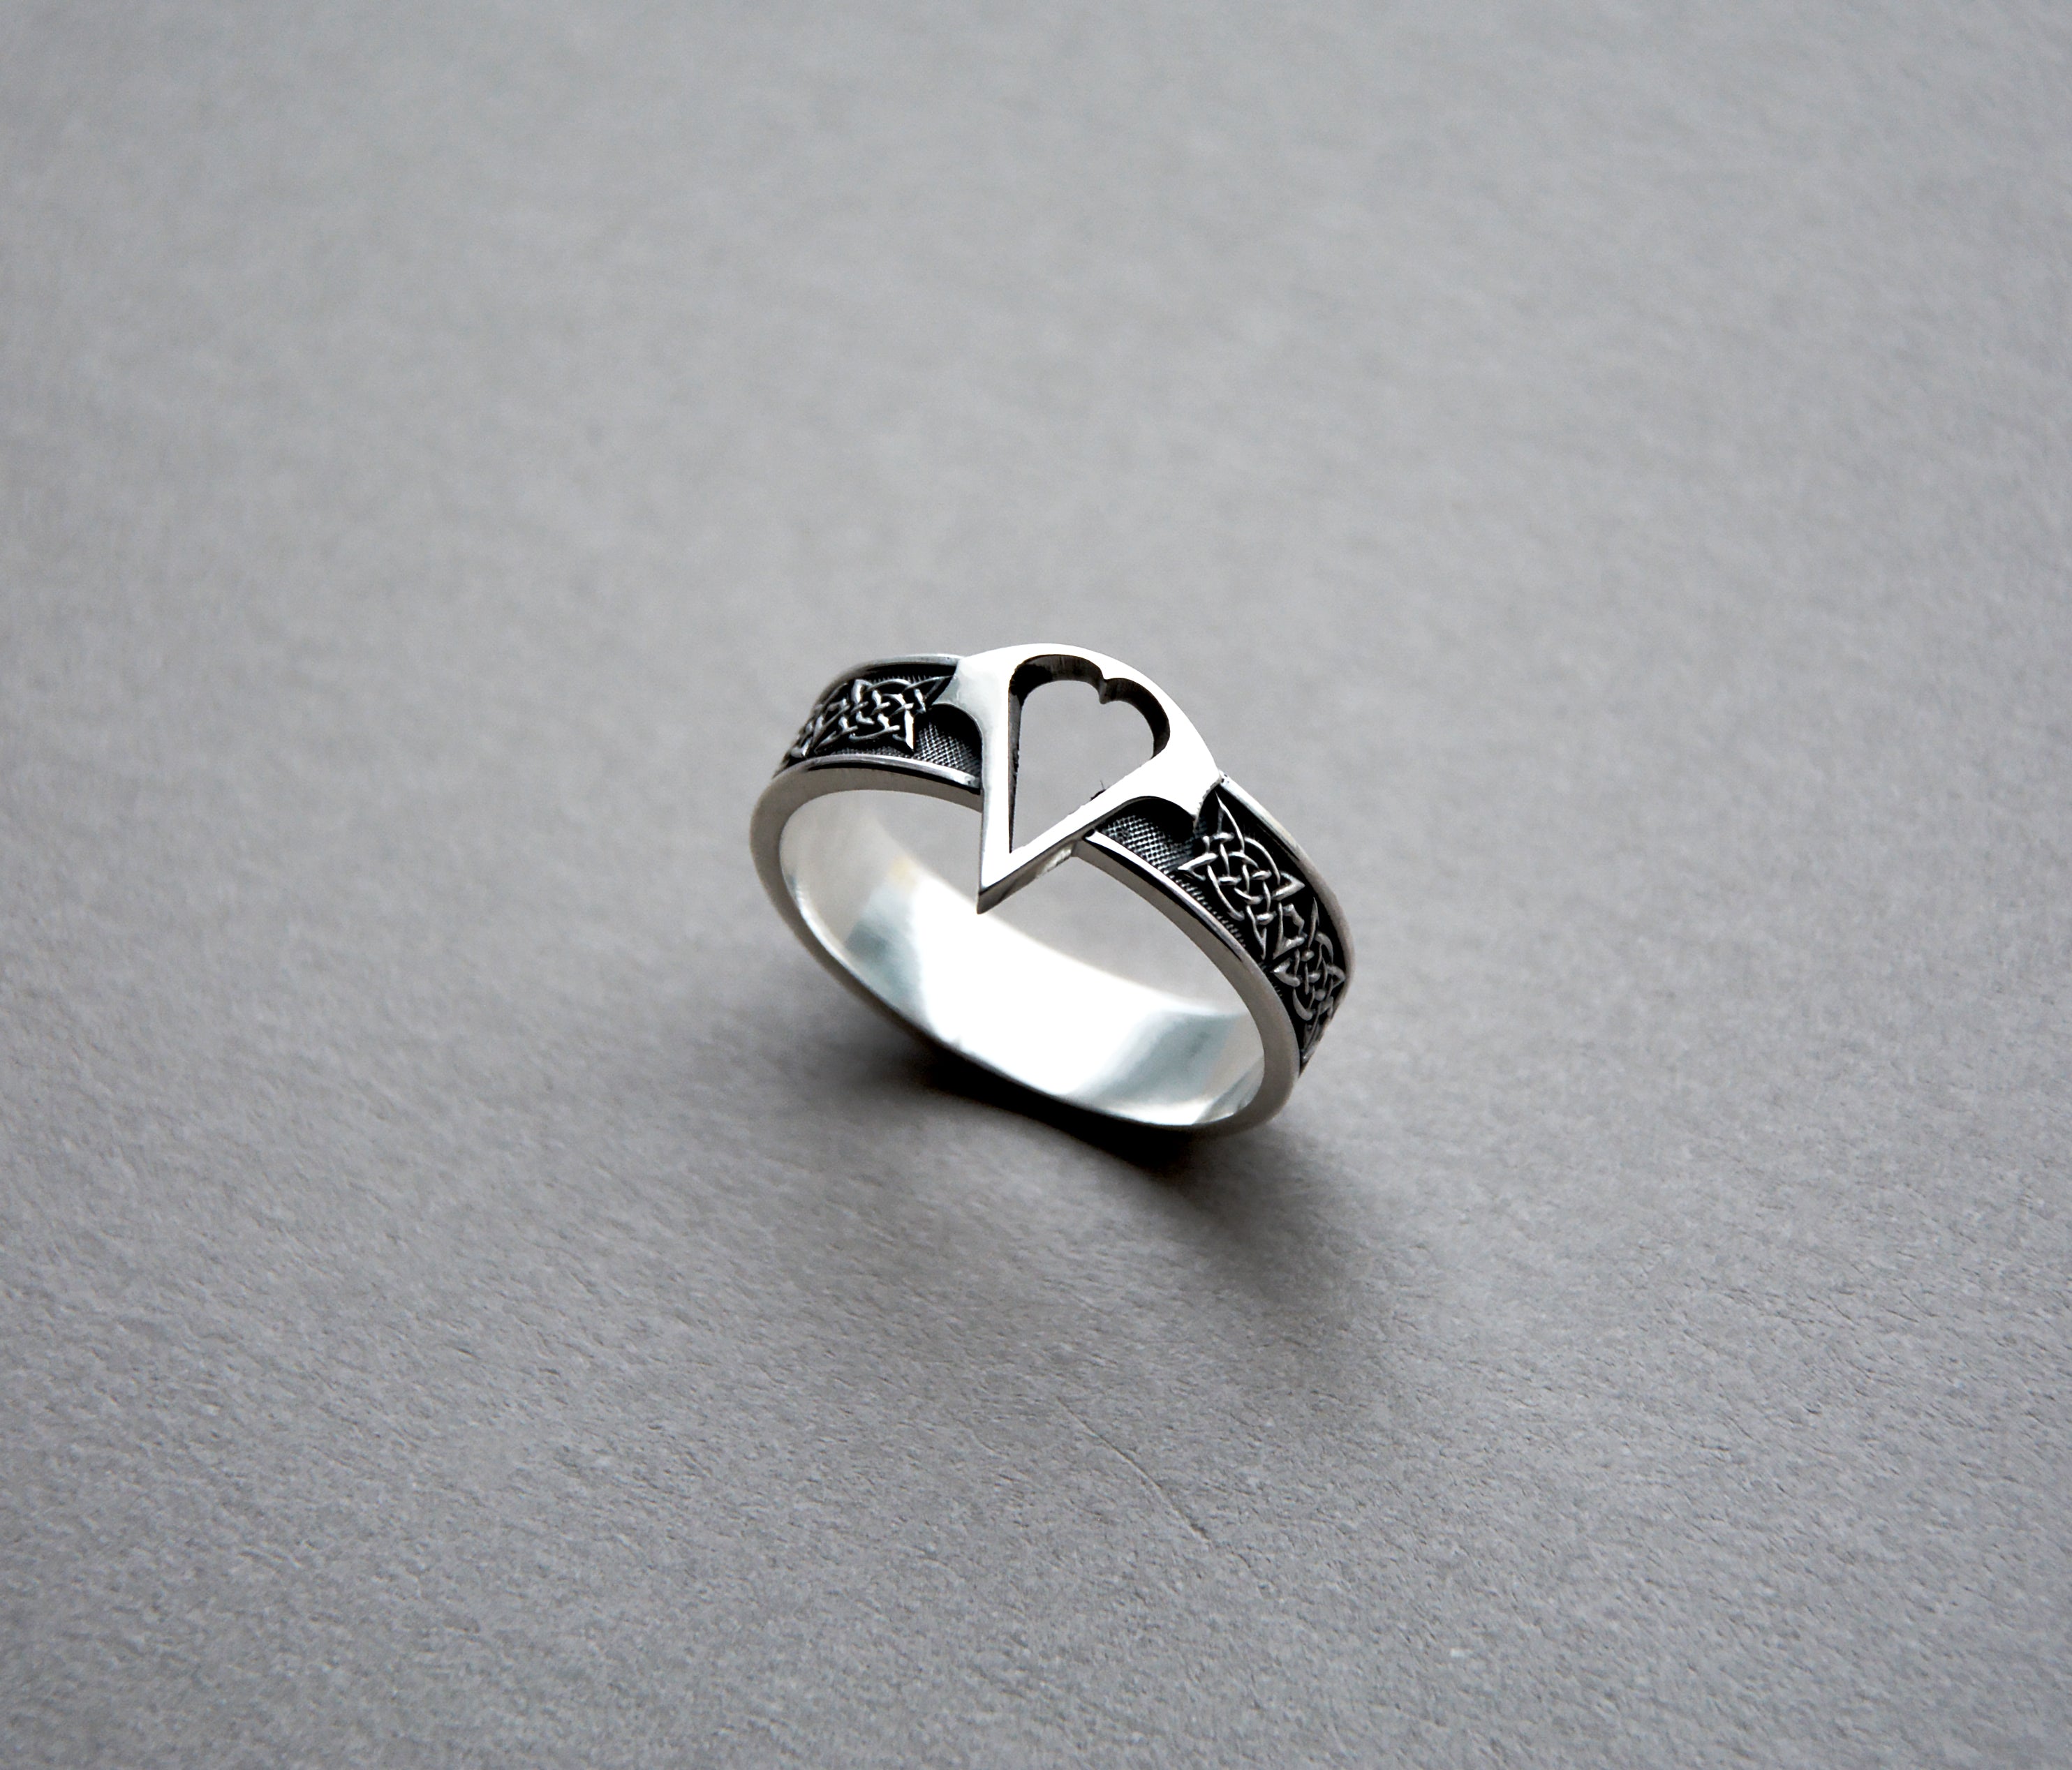 misfitwedding | Body jewelry shop, Assassins creed, Assassins creed clothing